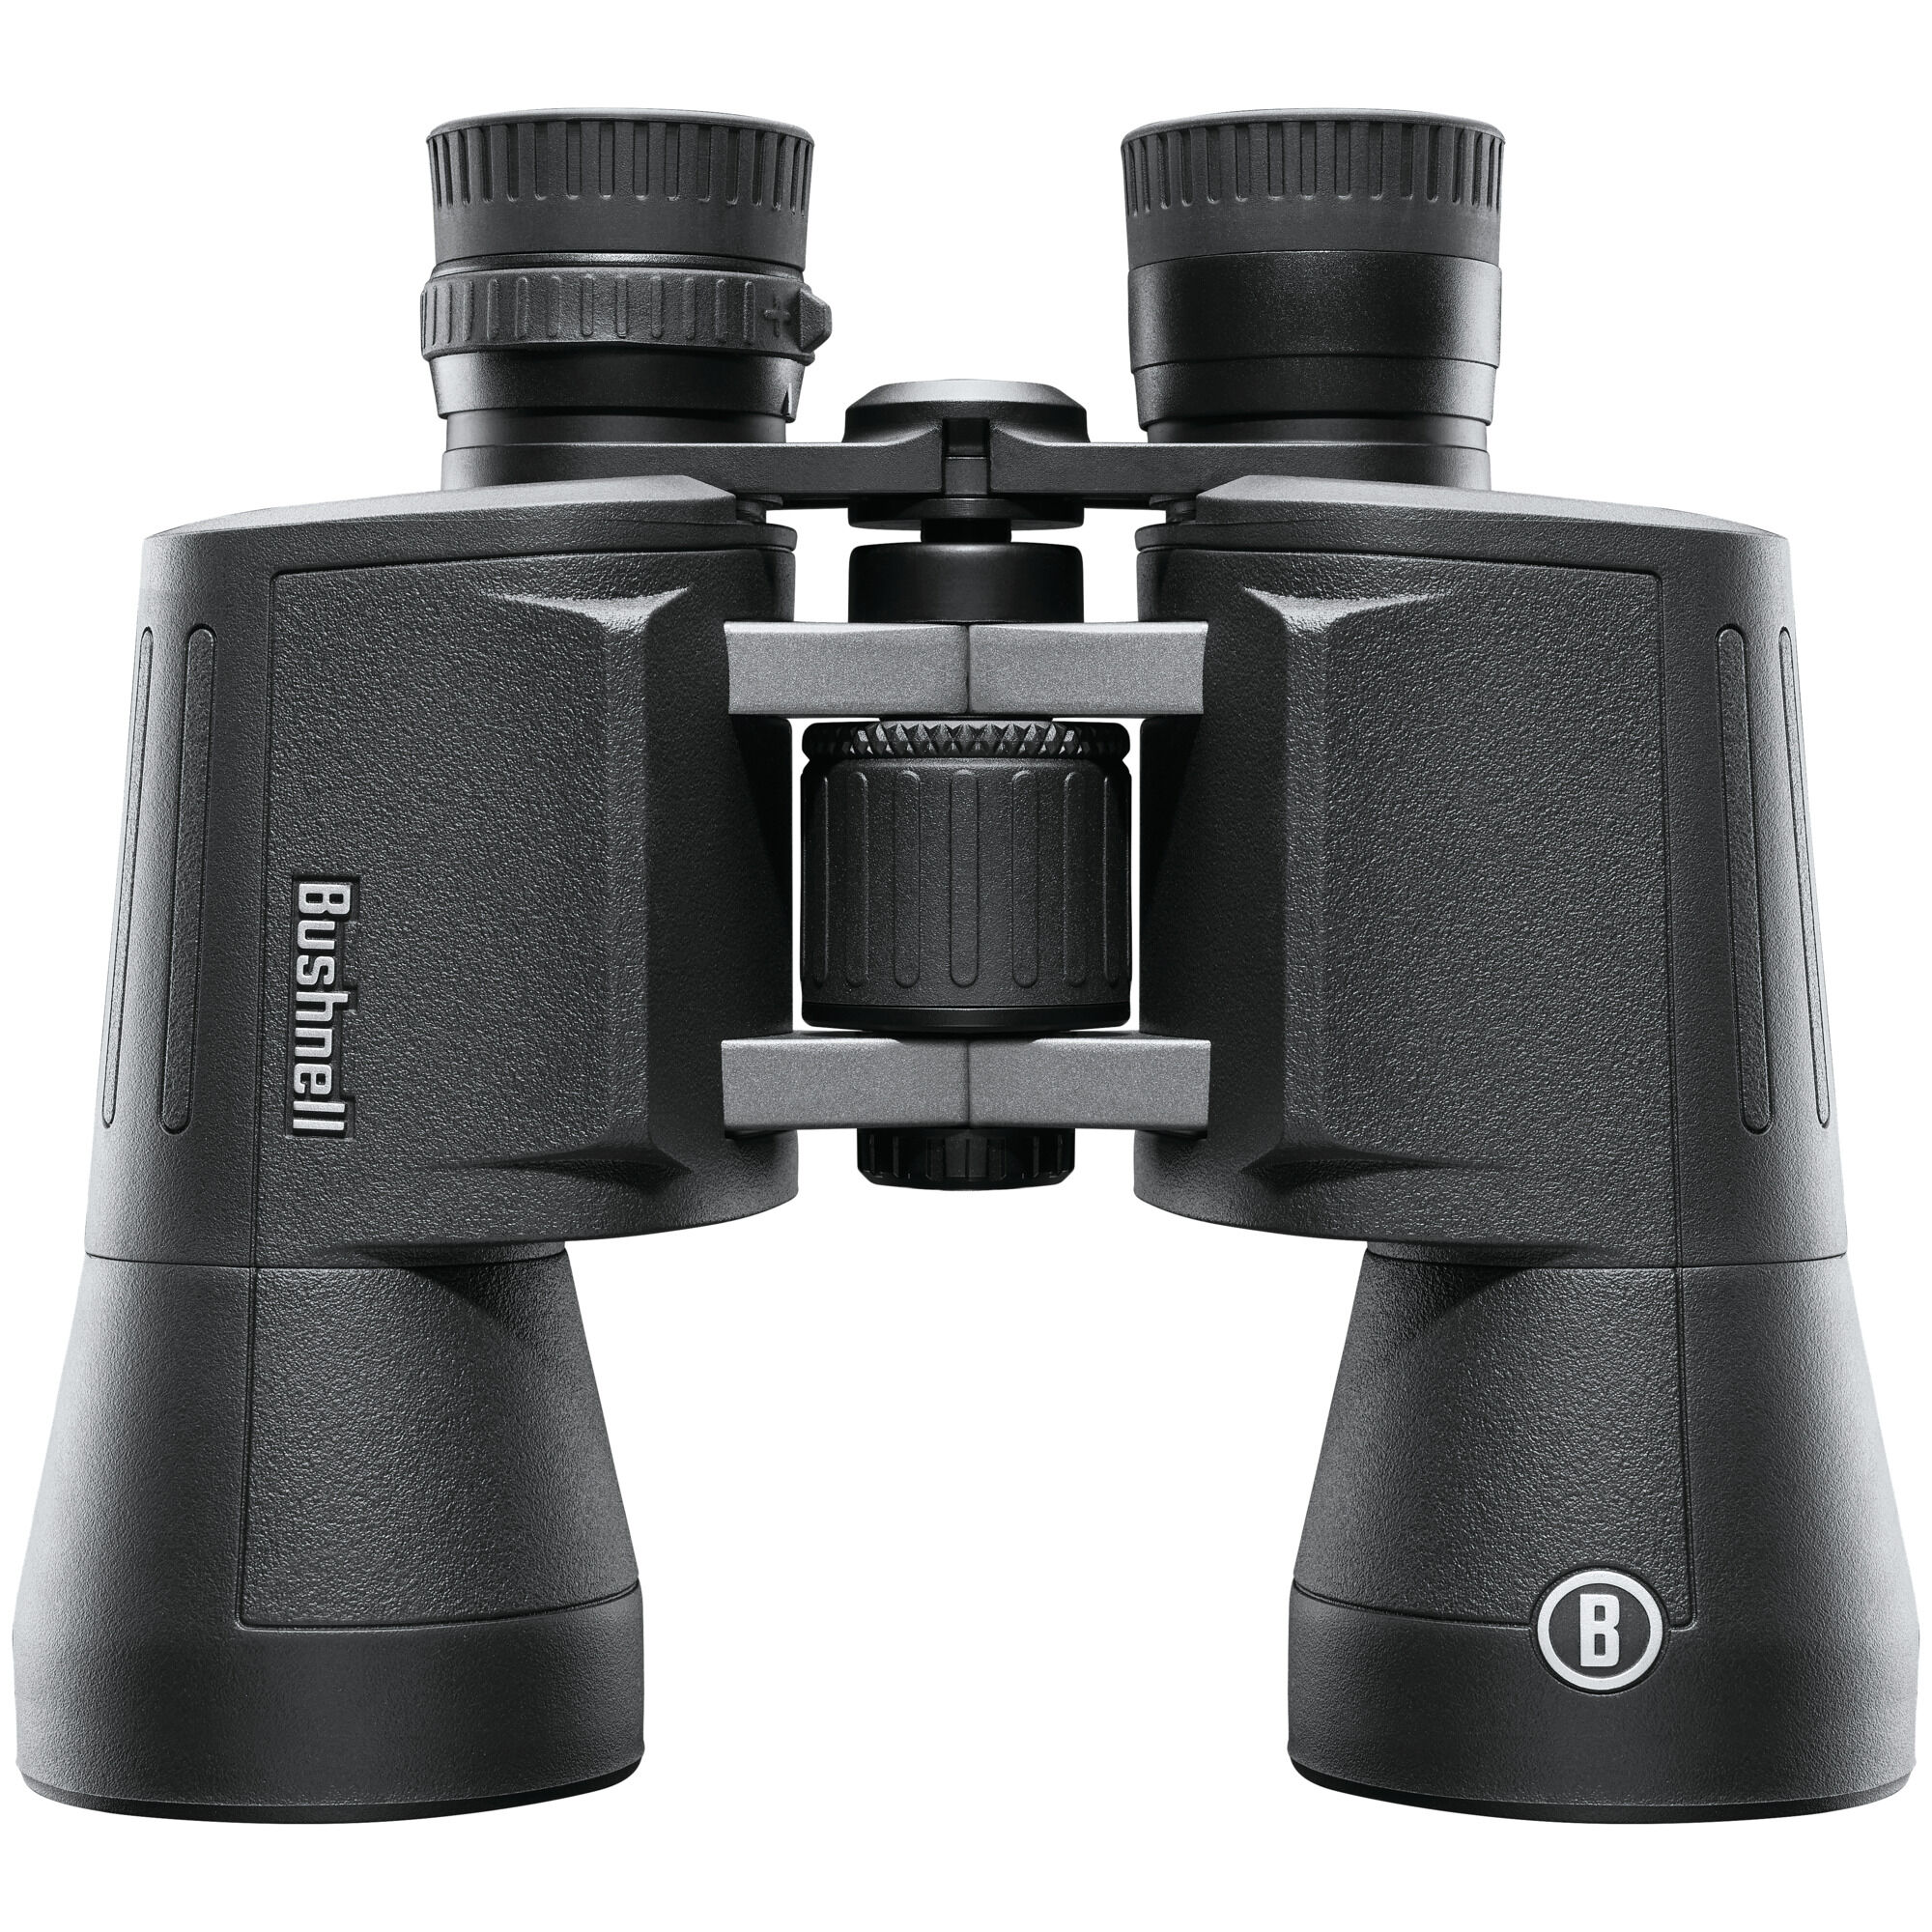 10x50 Binoculars High Magnification Long Range for Outdoor Travel Camping Theate 